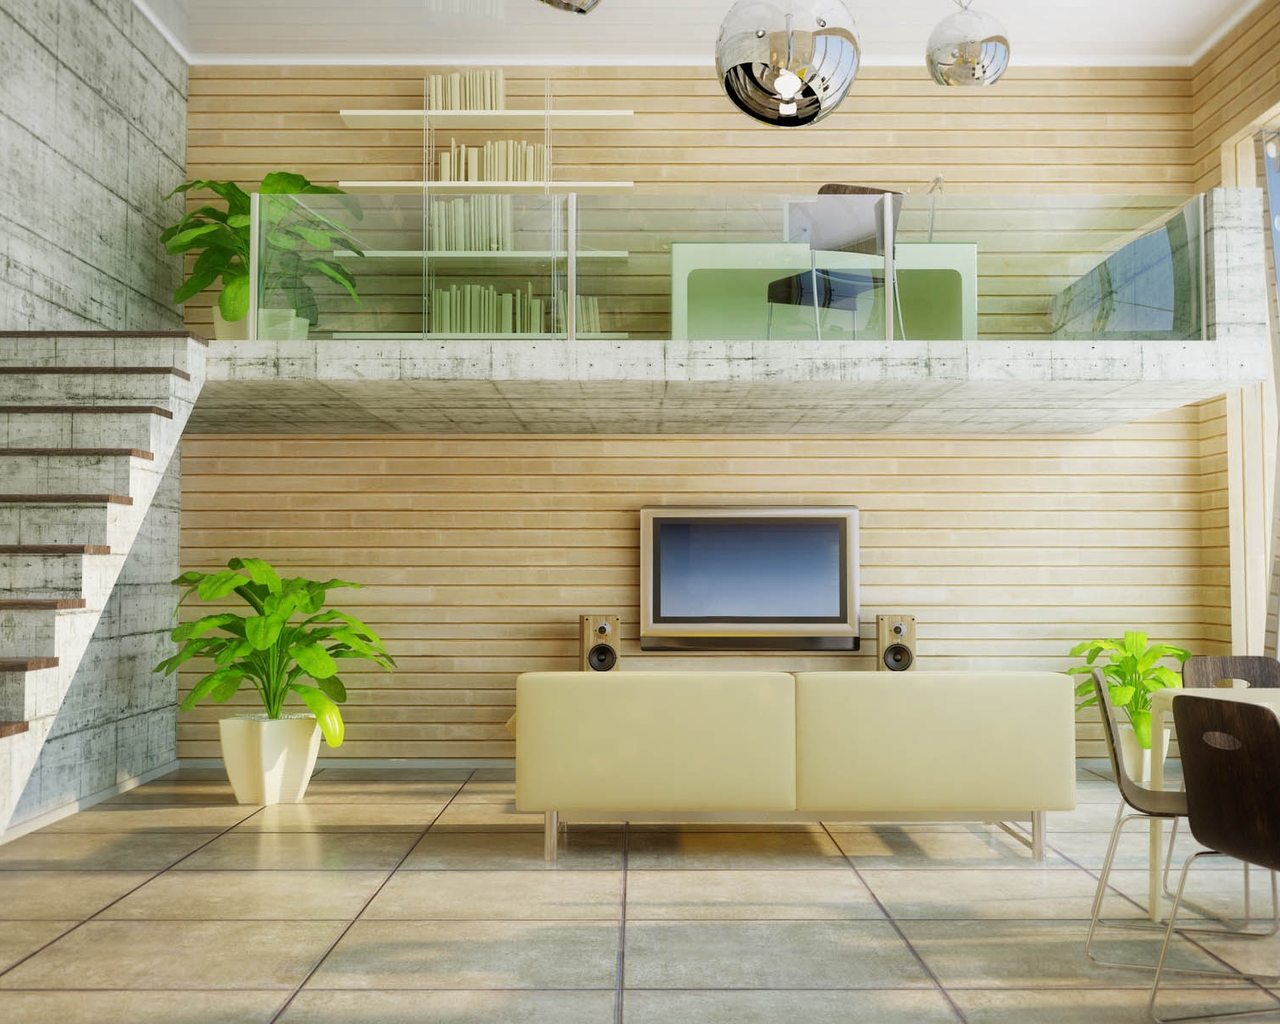 Image: Stairs, plants, sofa, chairs, shelves, TV, speakers, window